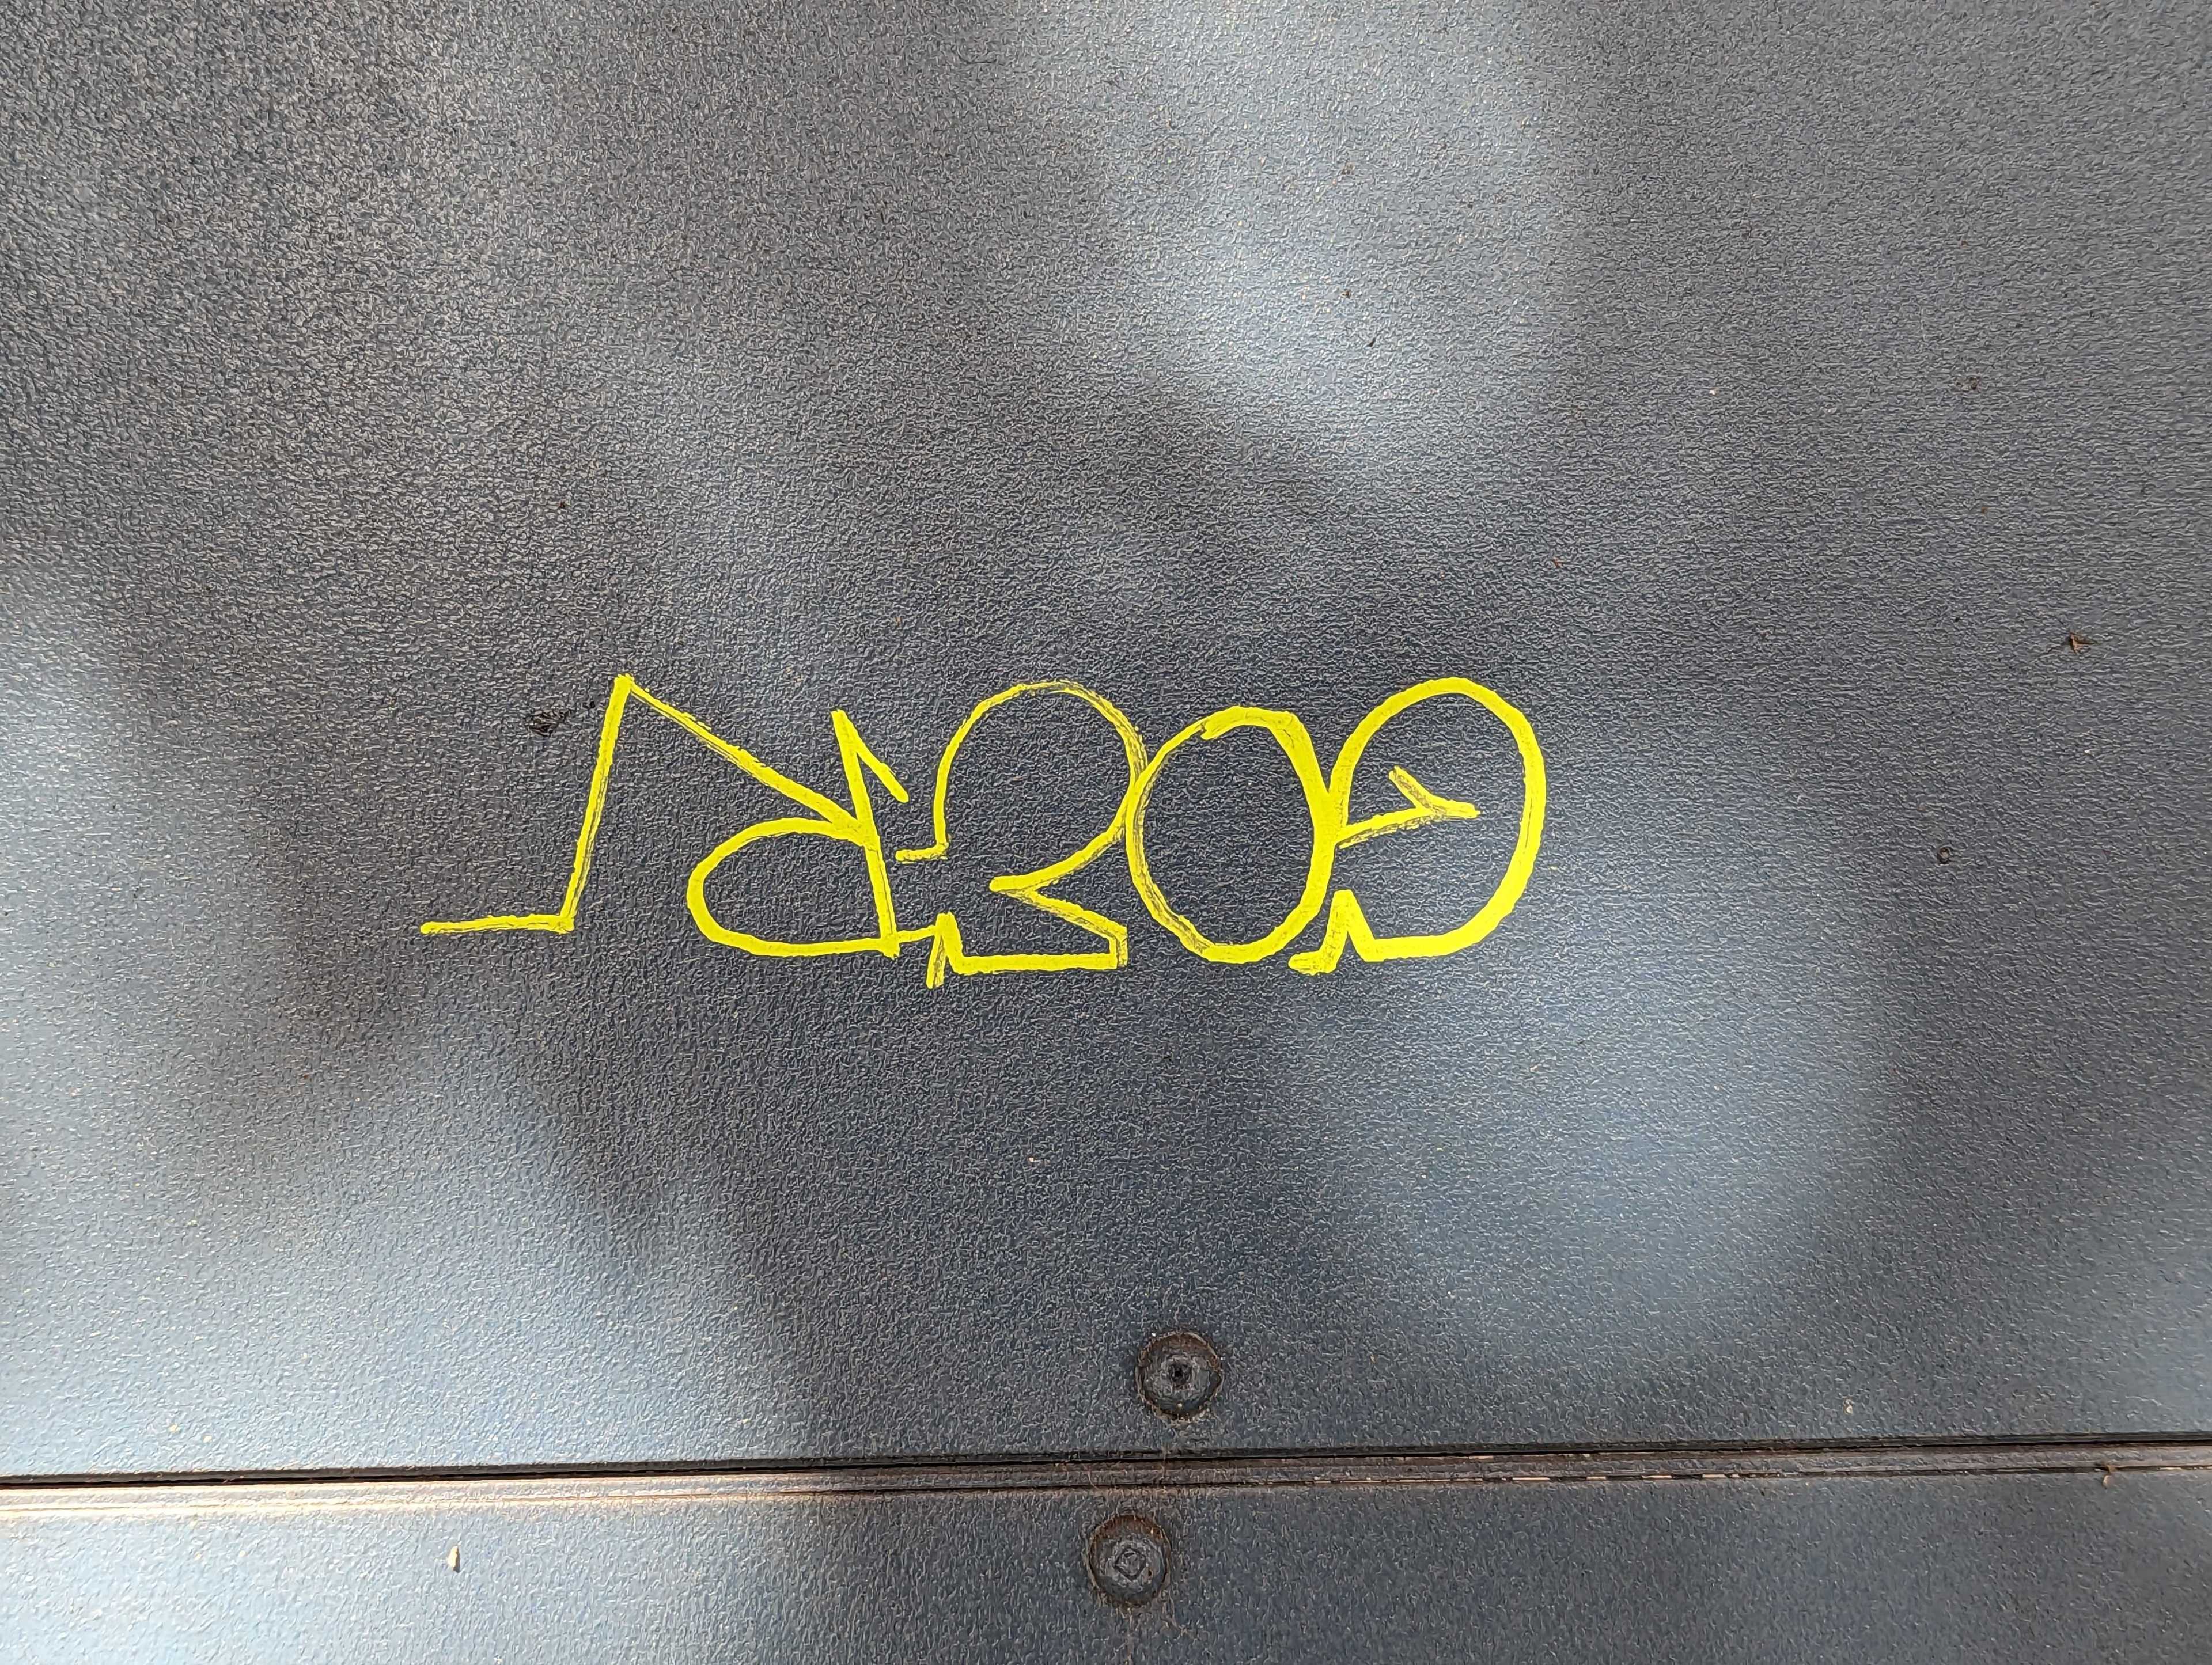 Outside a popular wine bar on Folsom Street in San Francisco's South of Market neighborhood, a small yellow markered graffiti tag mars a doorway.